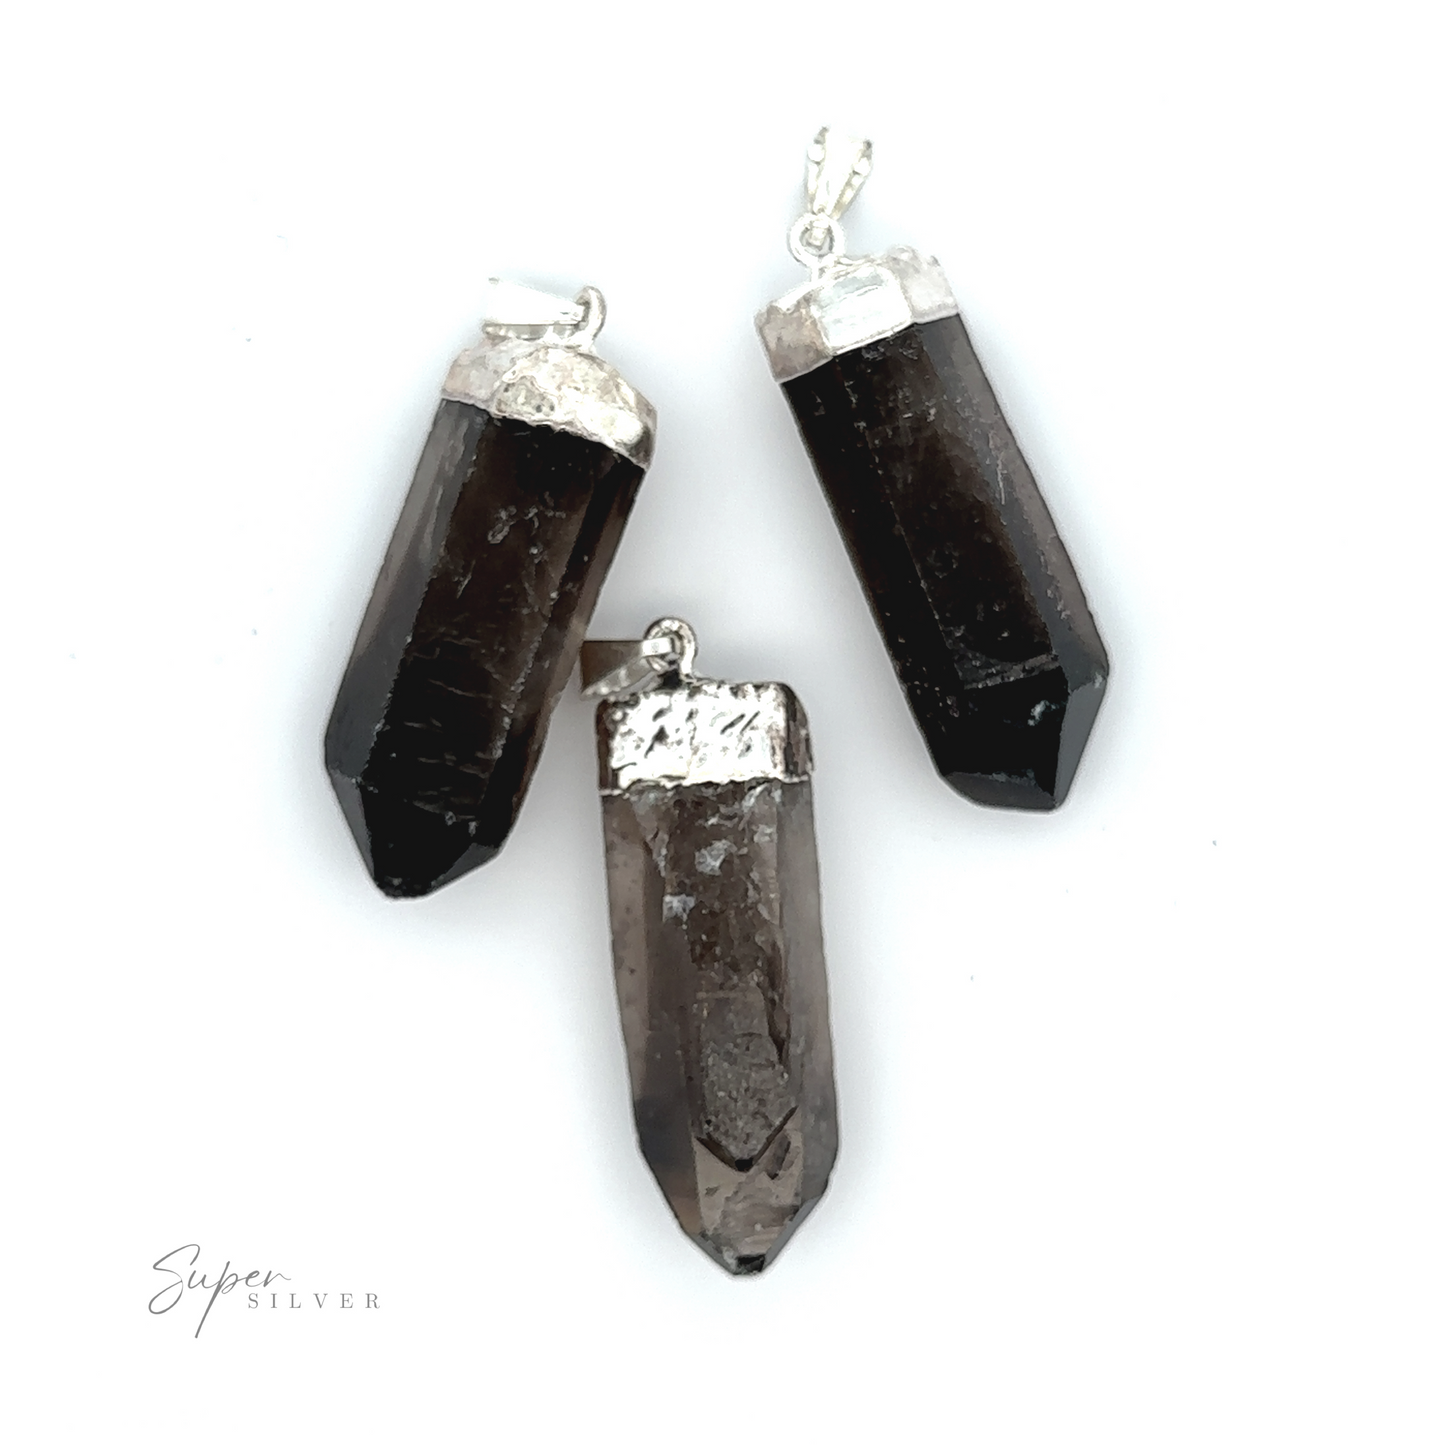 
                  
                    Three dark brown Raw Crystal Pendants With Silver Caps and loops, crafted from natural gemstone pendants, are arranged on a white background. The bottom left corner features the text "Super Silver.
                  
                